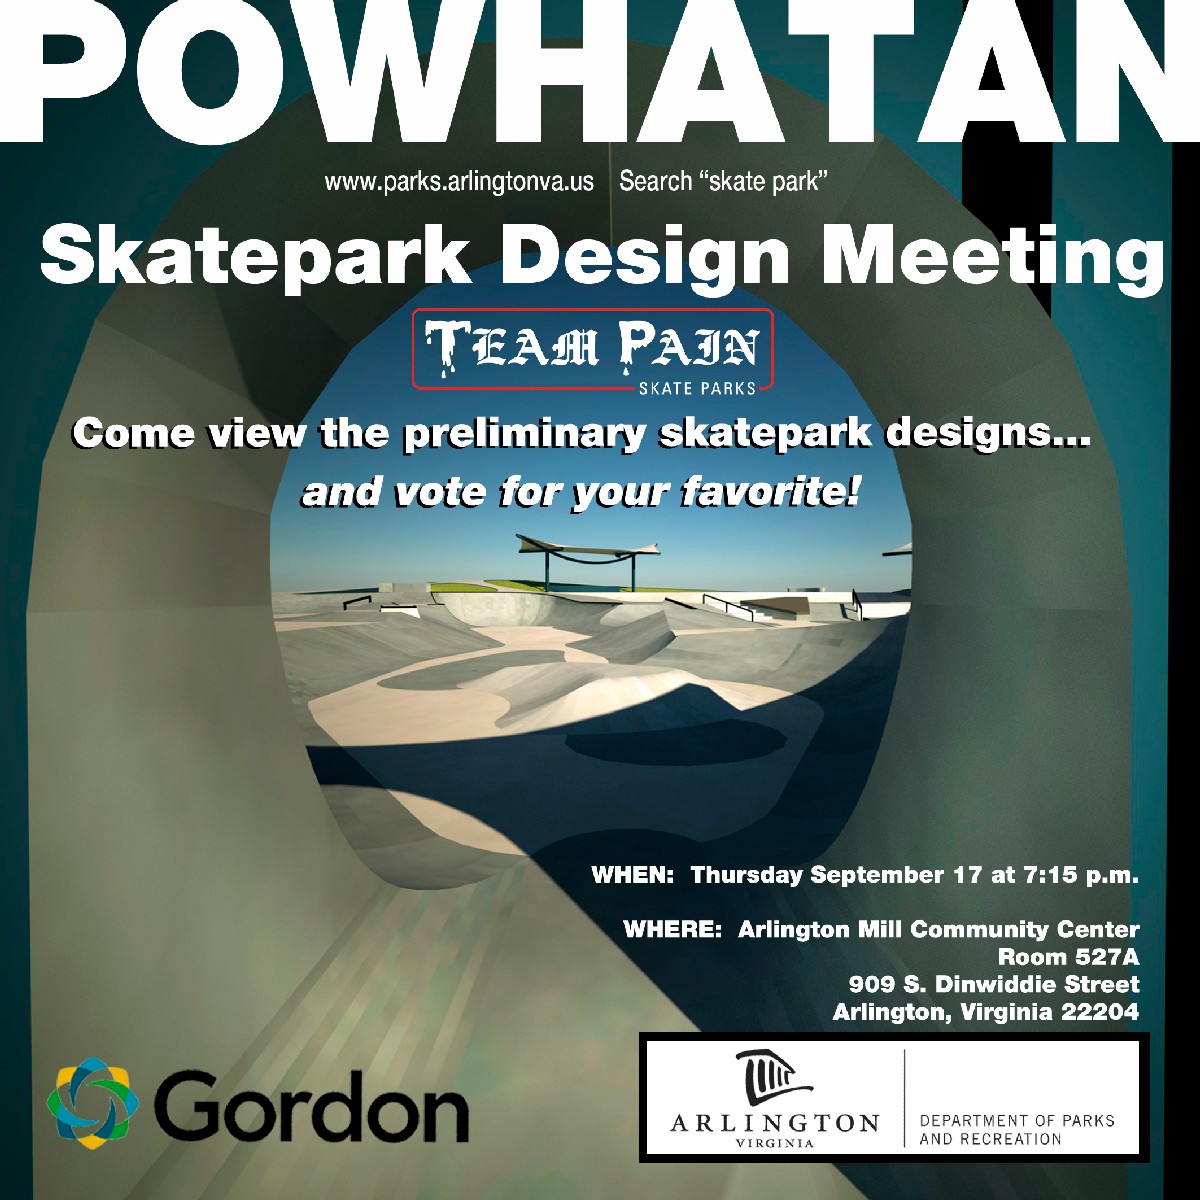 PowhatanPublicInputMeeting two preliminary designs V2